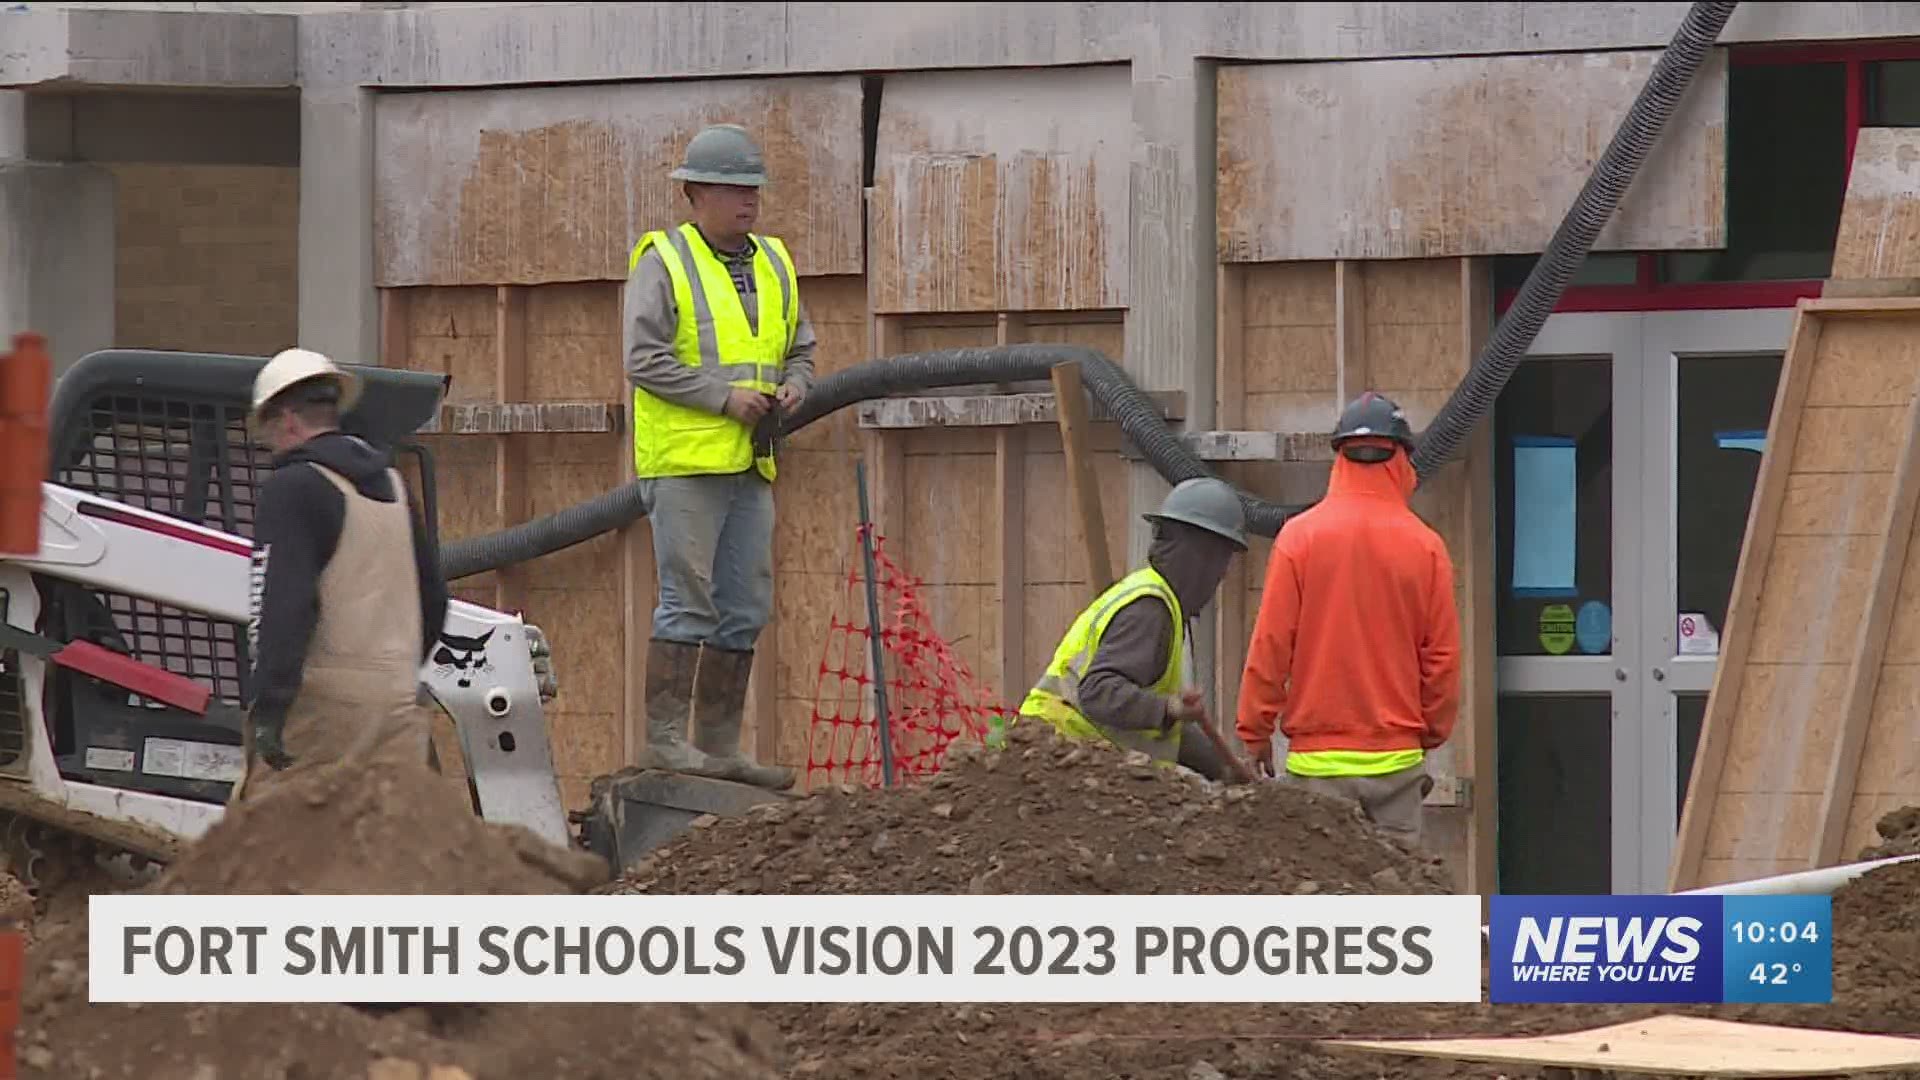 School officials said all projects included in the $120 million plan funded by a 2018 millage increase are on schedule to be completed by August 2021.